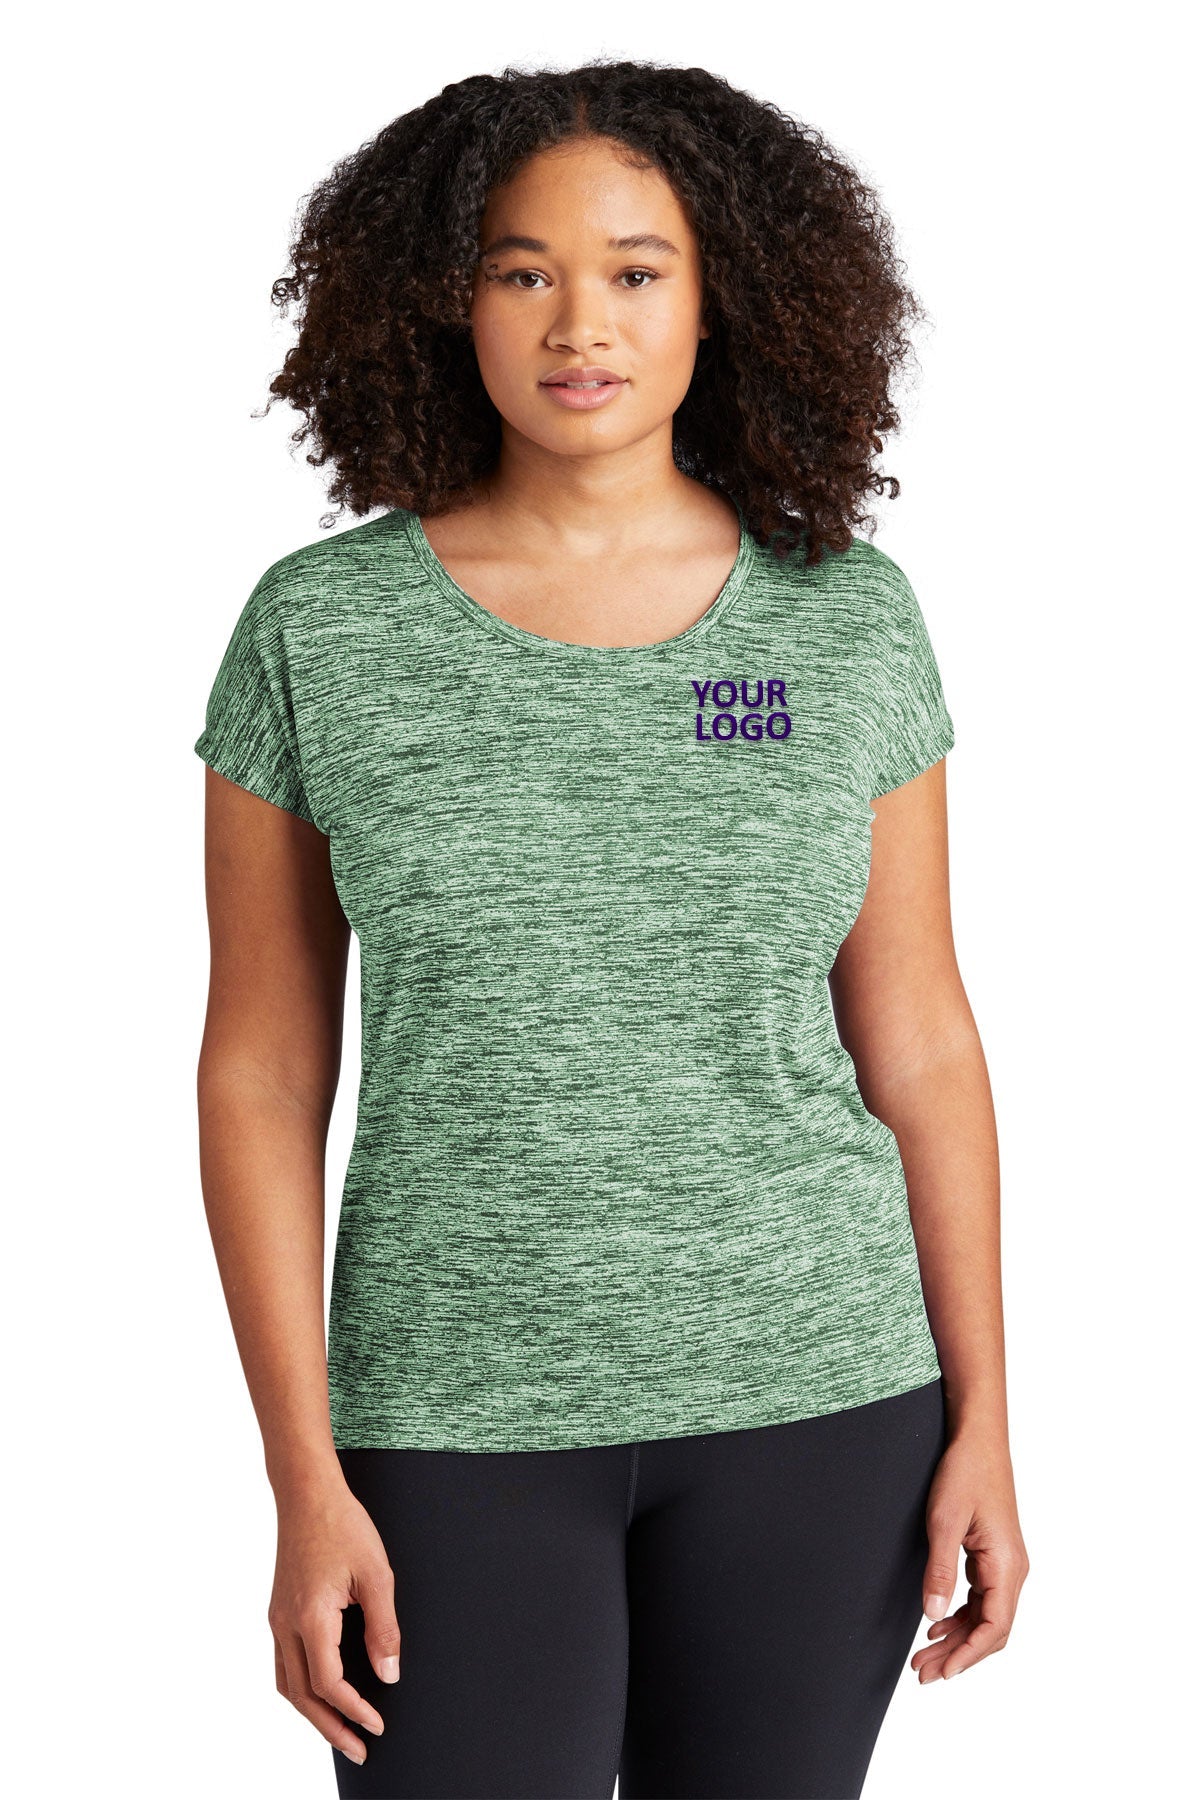 Sport-Tek Ladies PosiCharge Electric Heather Customized Sporty Tee's, Forest Green Electric